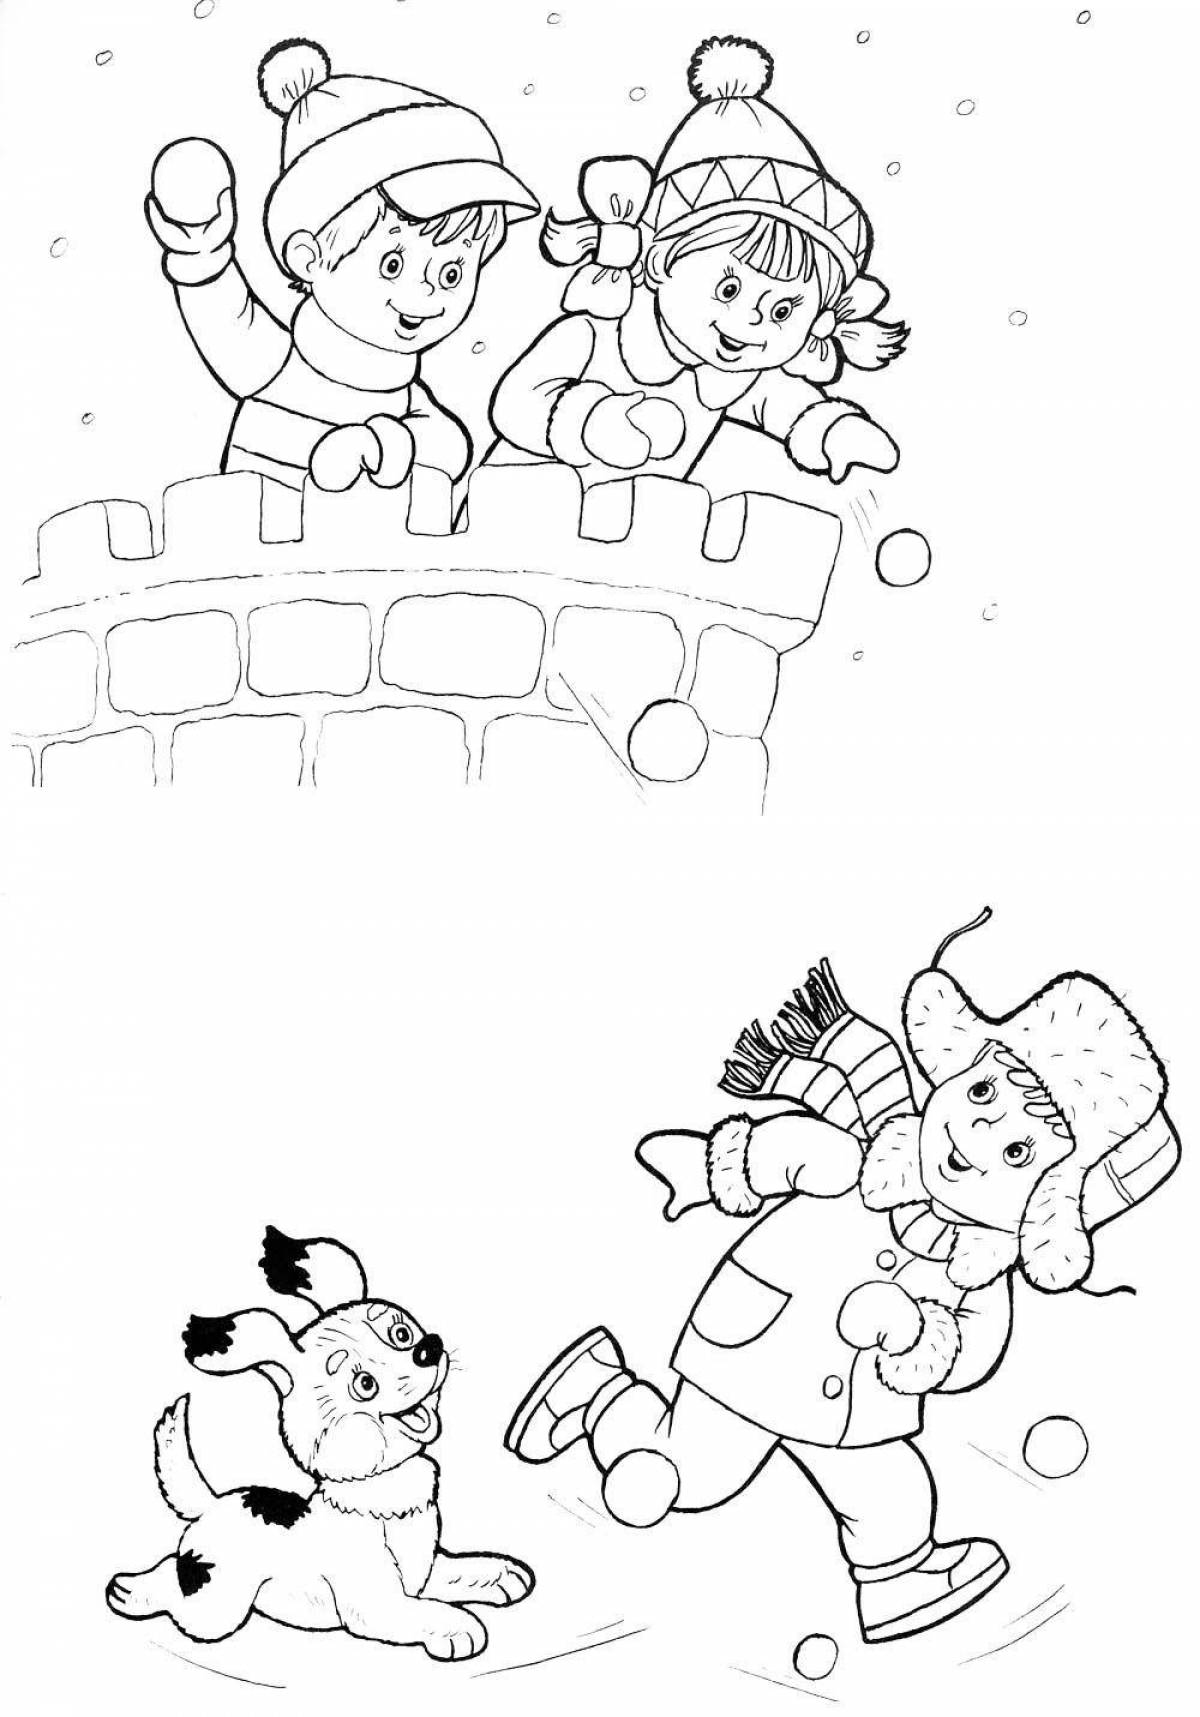 Colorful winter games coloring page